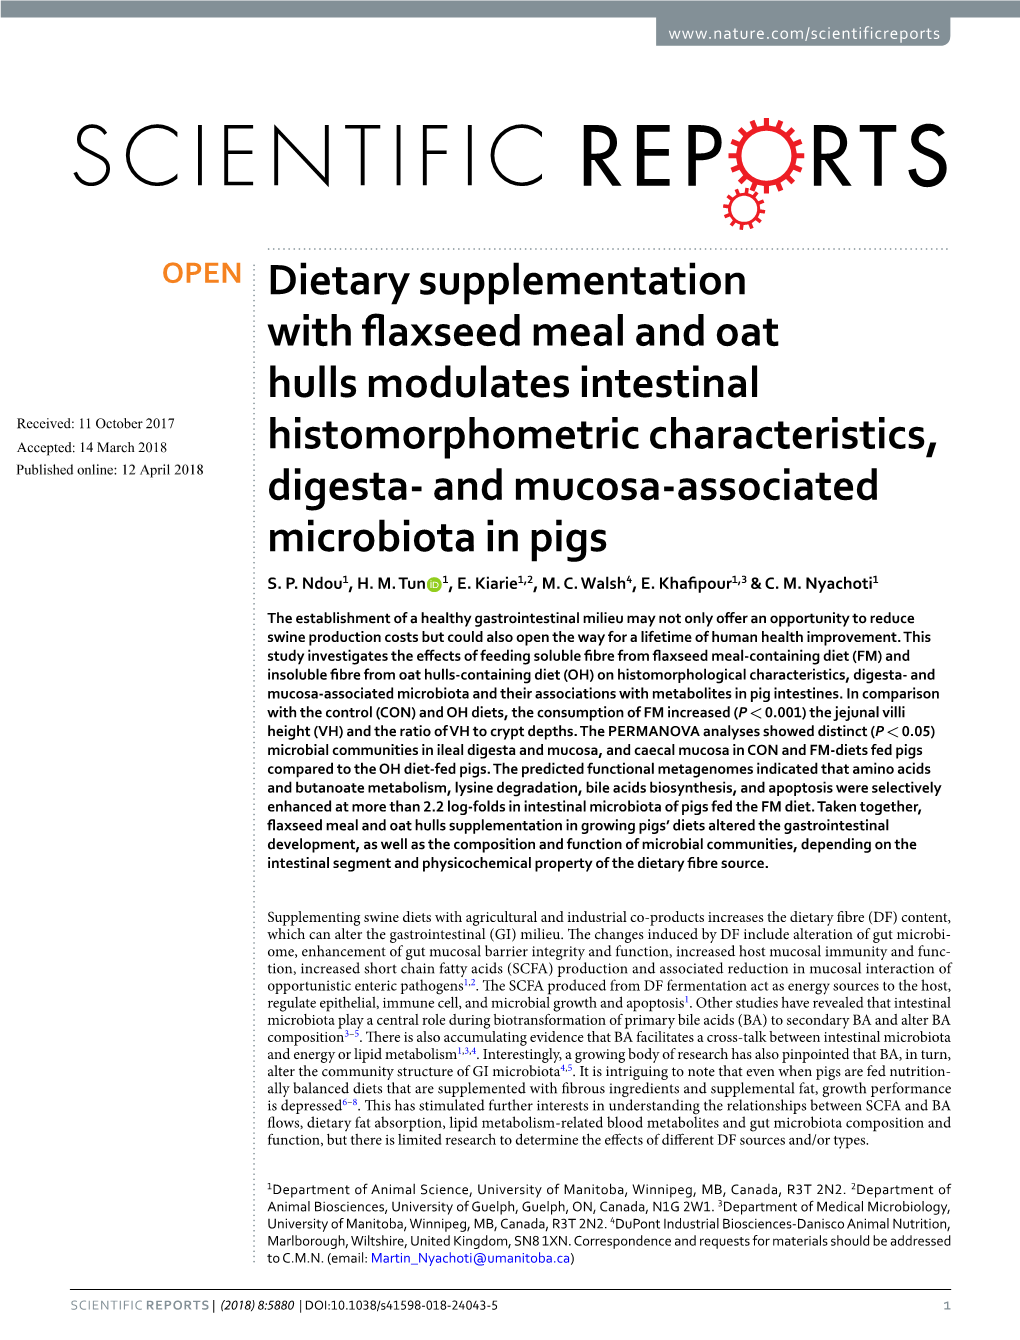 Dietary Supplementation with Flaxseed Meal and Oat Hulls